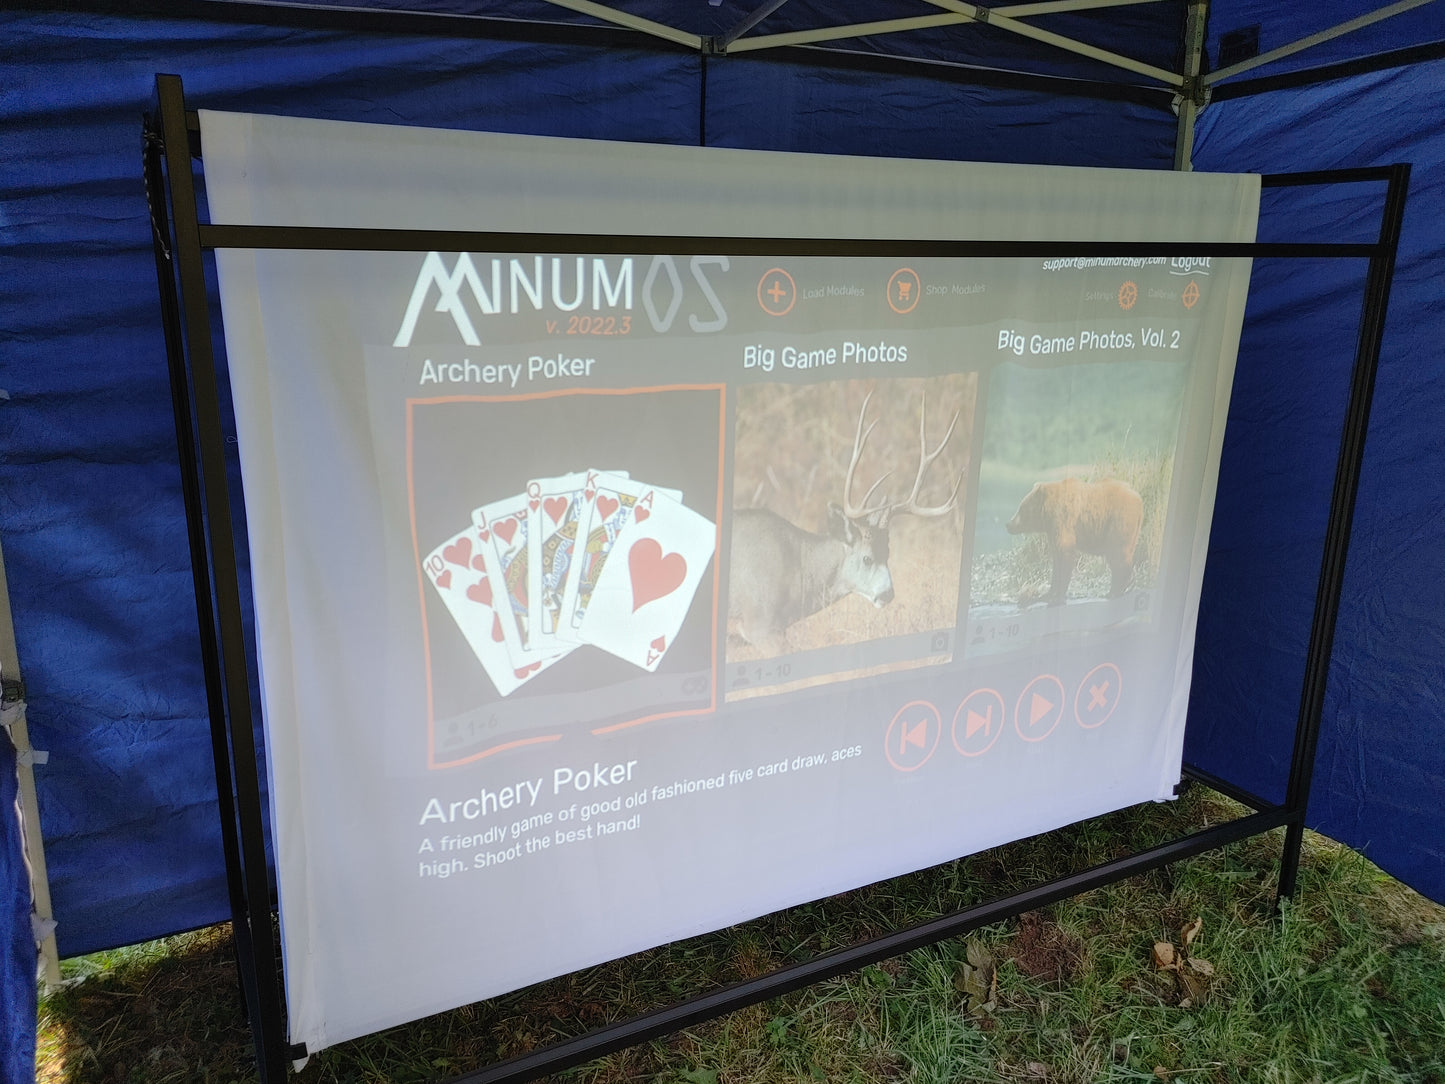 Simulator 2.0 setup outdoors in a popup tent